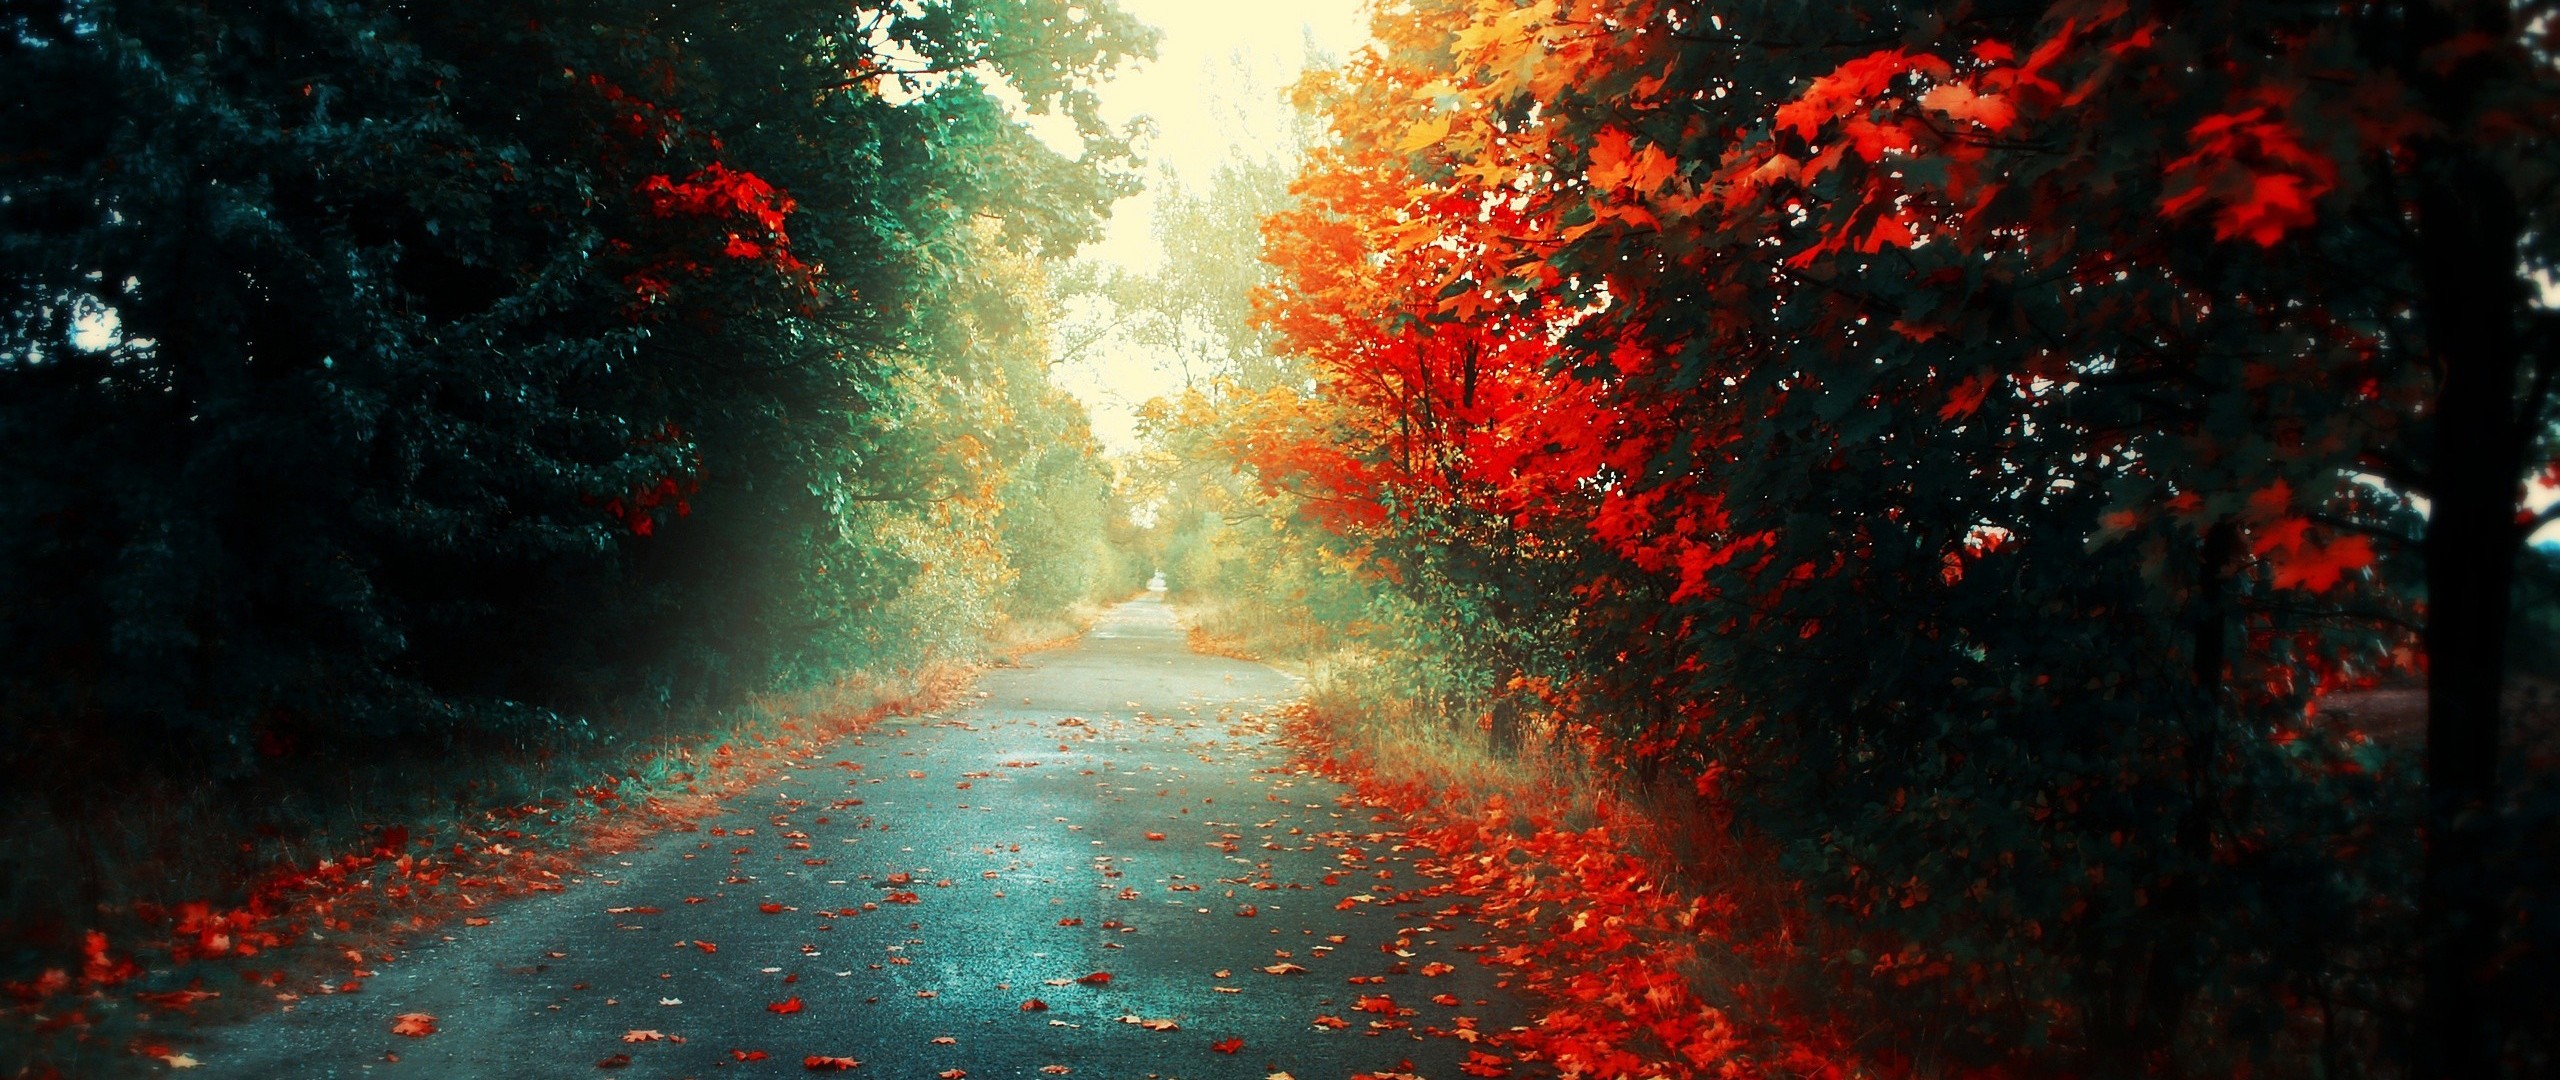 General 2560x1080 ultrawide photography fallen leaves leaves red leaves road outdoors